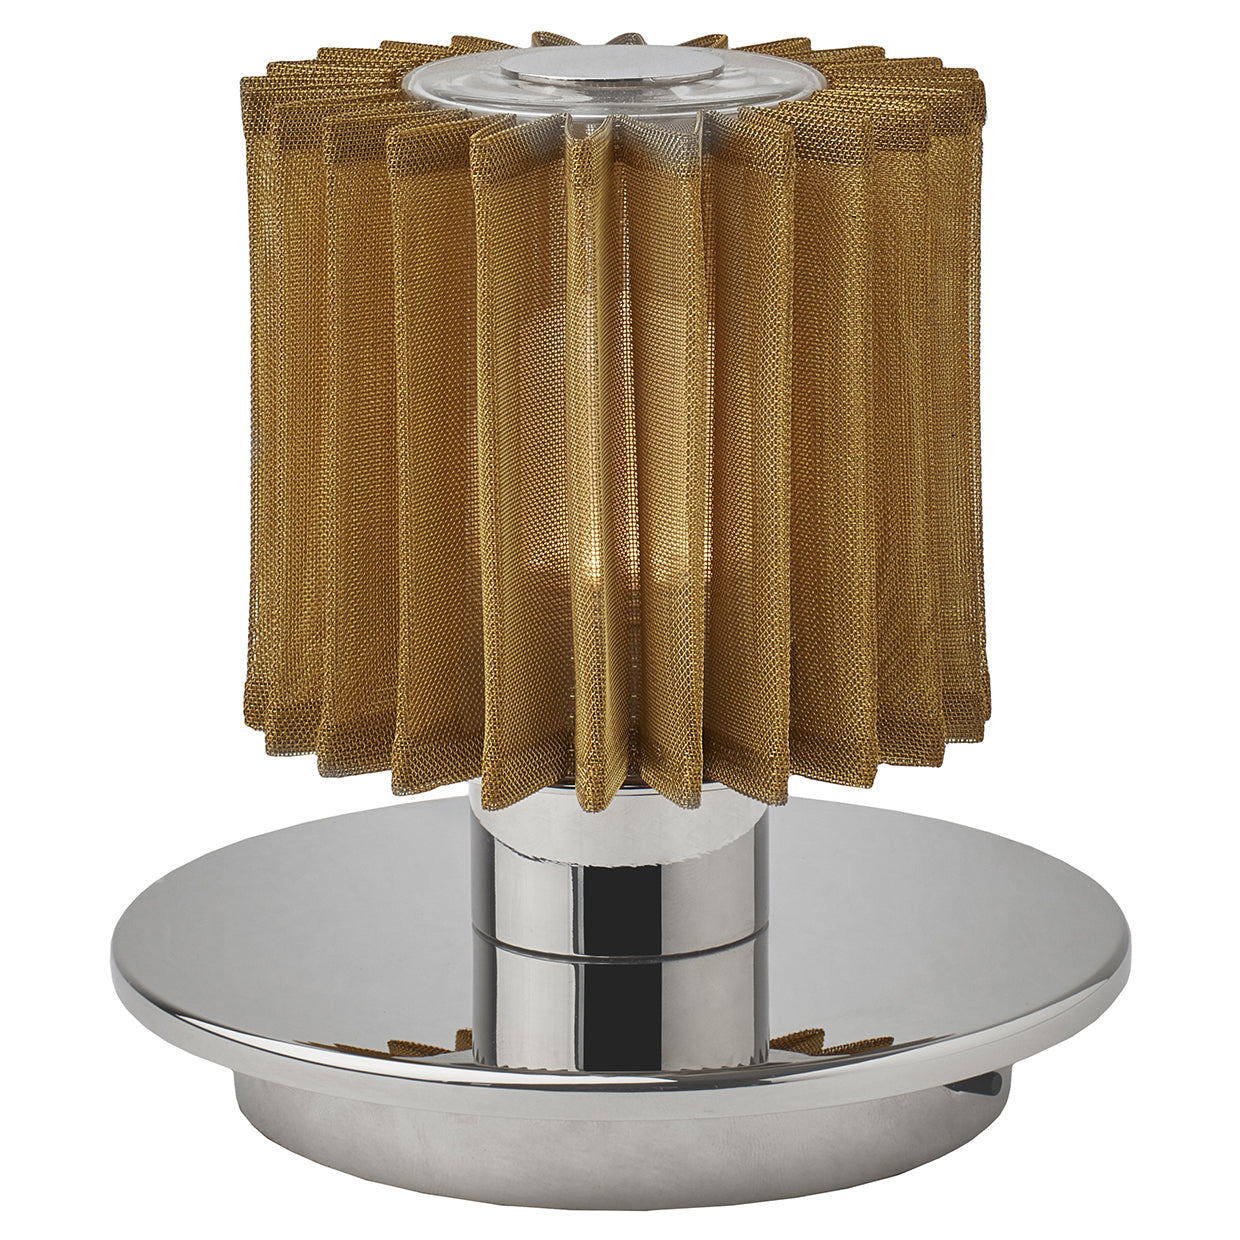 In The Sun Portable Table Lamp - $453.00-506.00